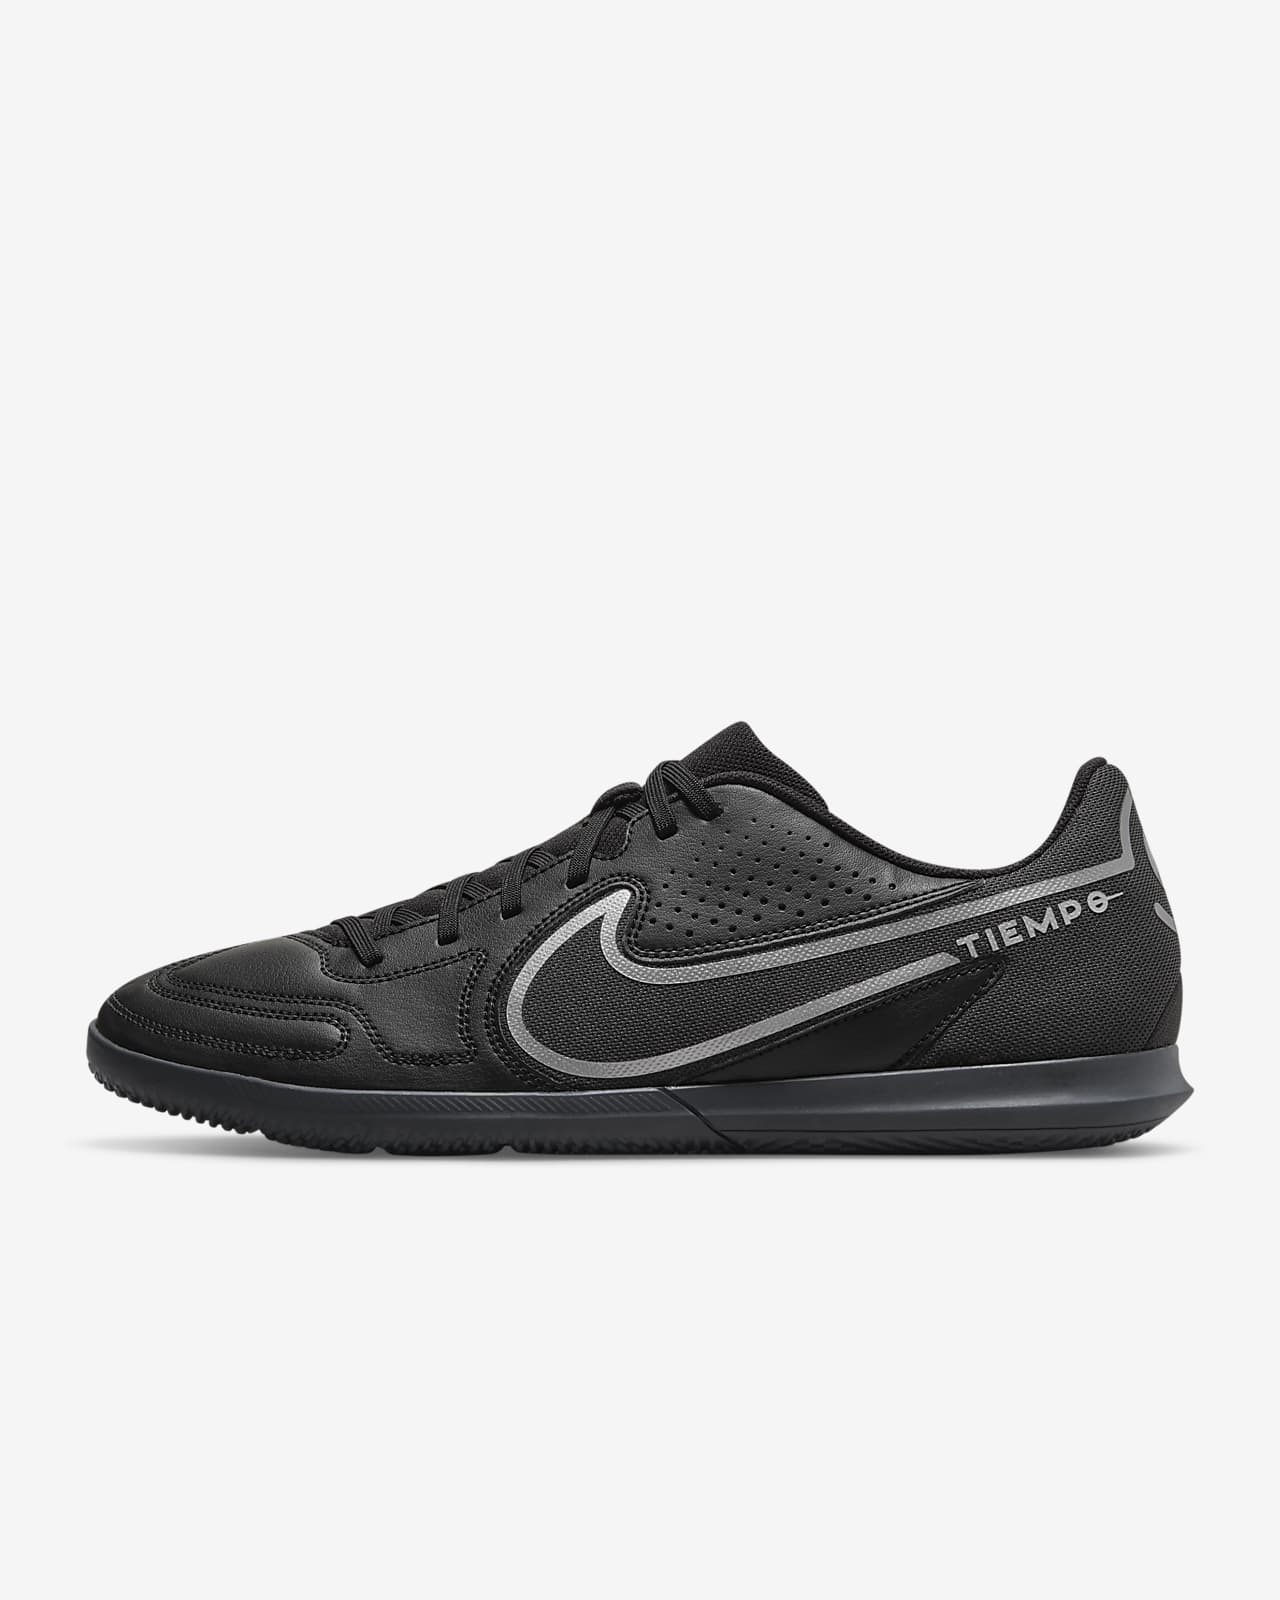 Nike Tiempo Legend 9 Club IC Indoor Court Football Shoes